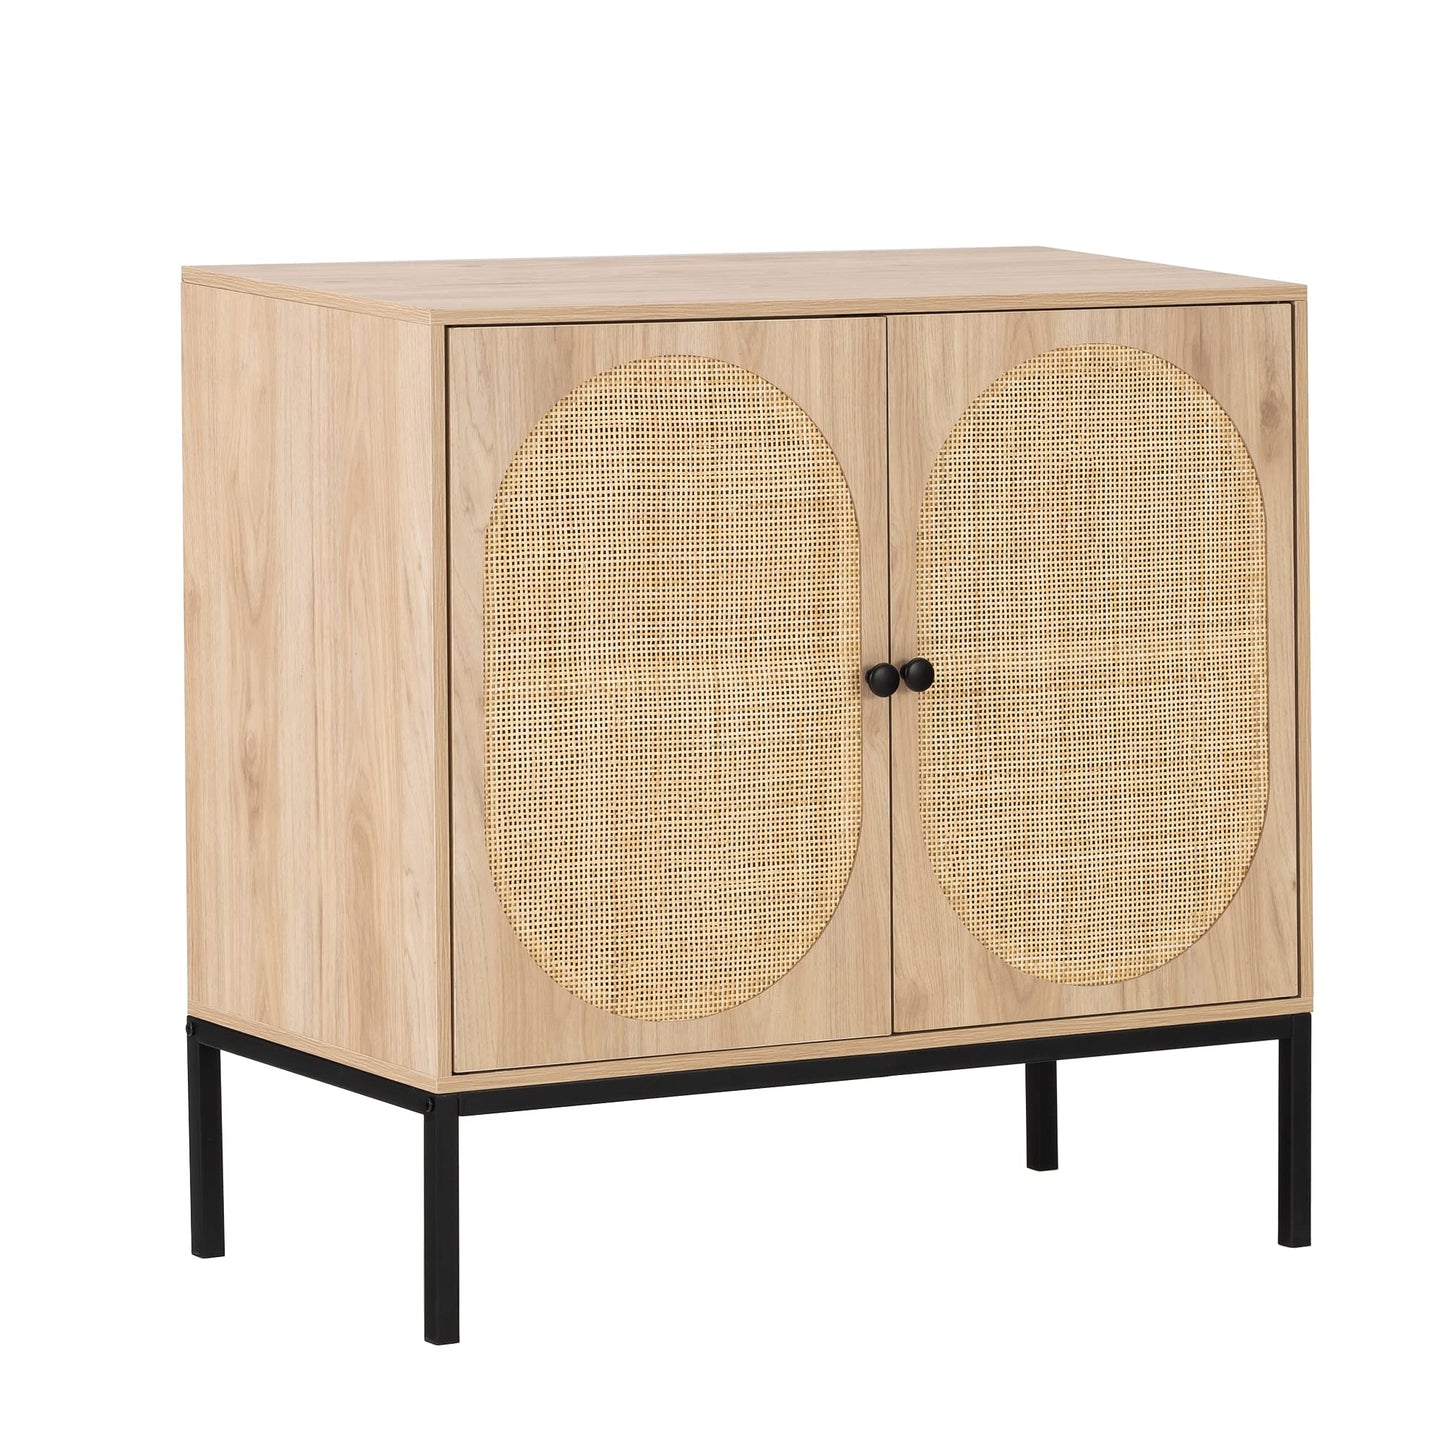 Yechen Set of 2 Sideboard Storage Cabinet with Handmade Natural Rattan Doors, Buffet Cabinet with Storage, for Living Room, Dining Room, Entryway,